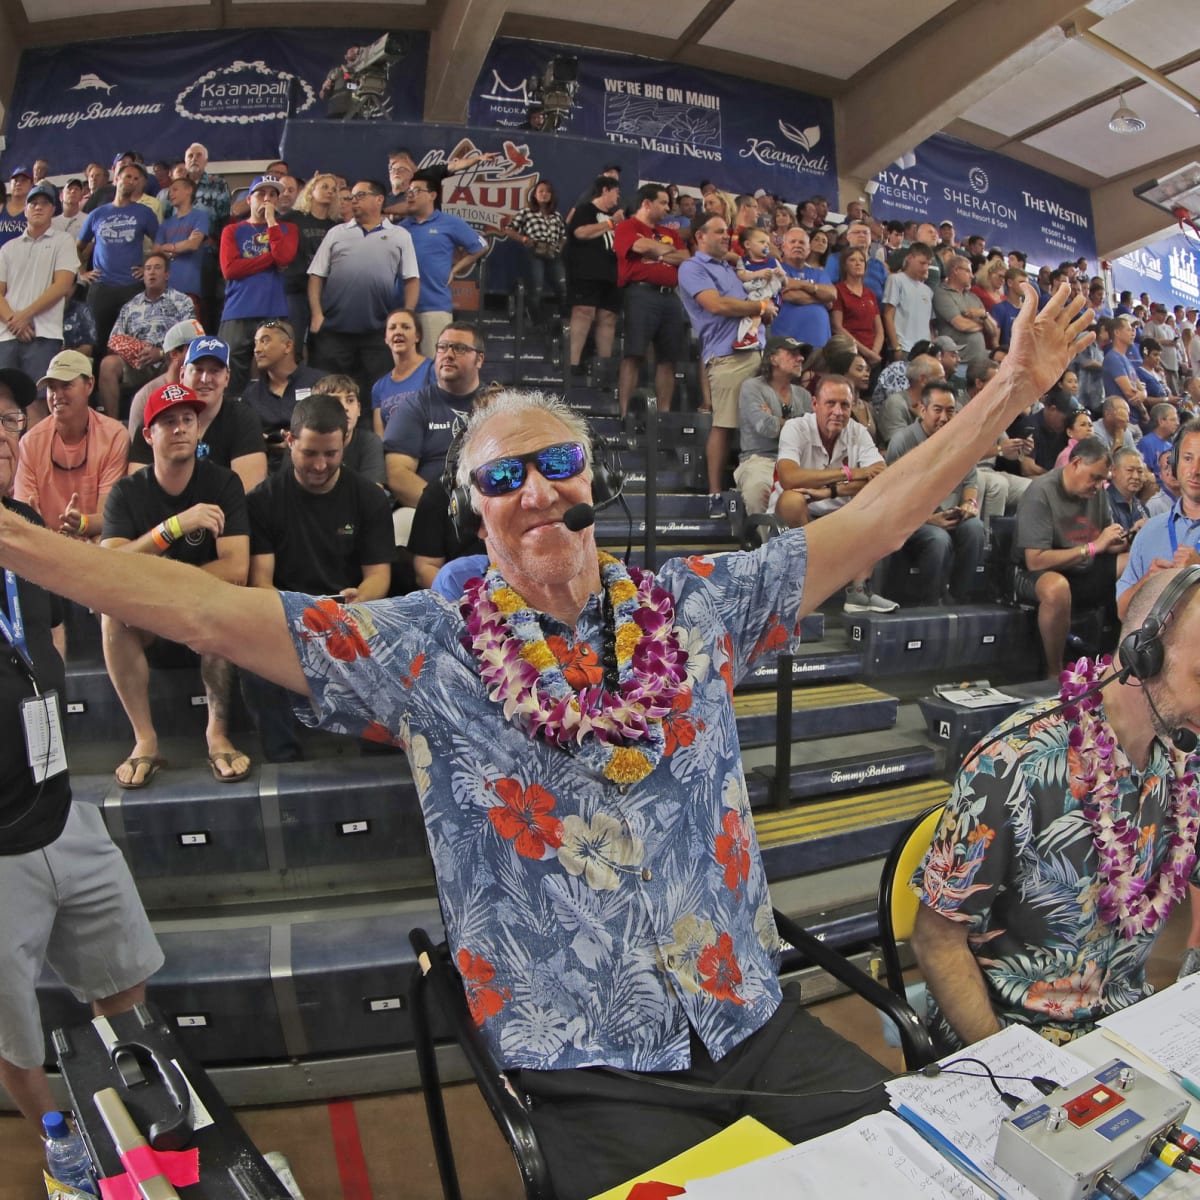 Bill Walton On Being “Leery” About ESPN Series On His Life And Career –  Deadline